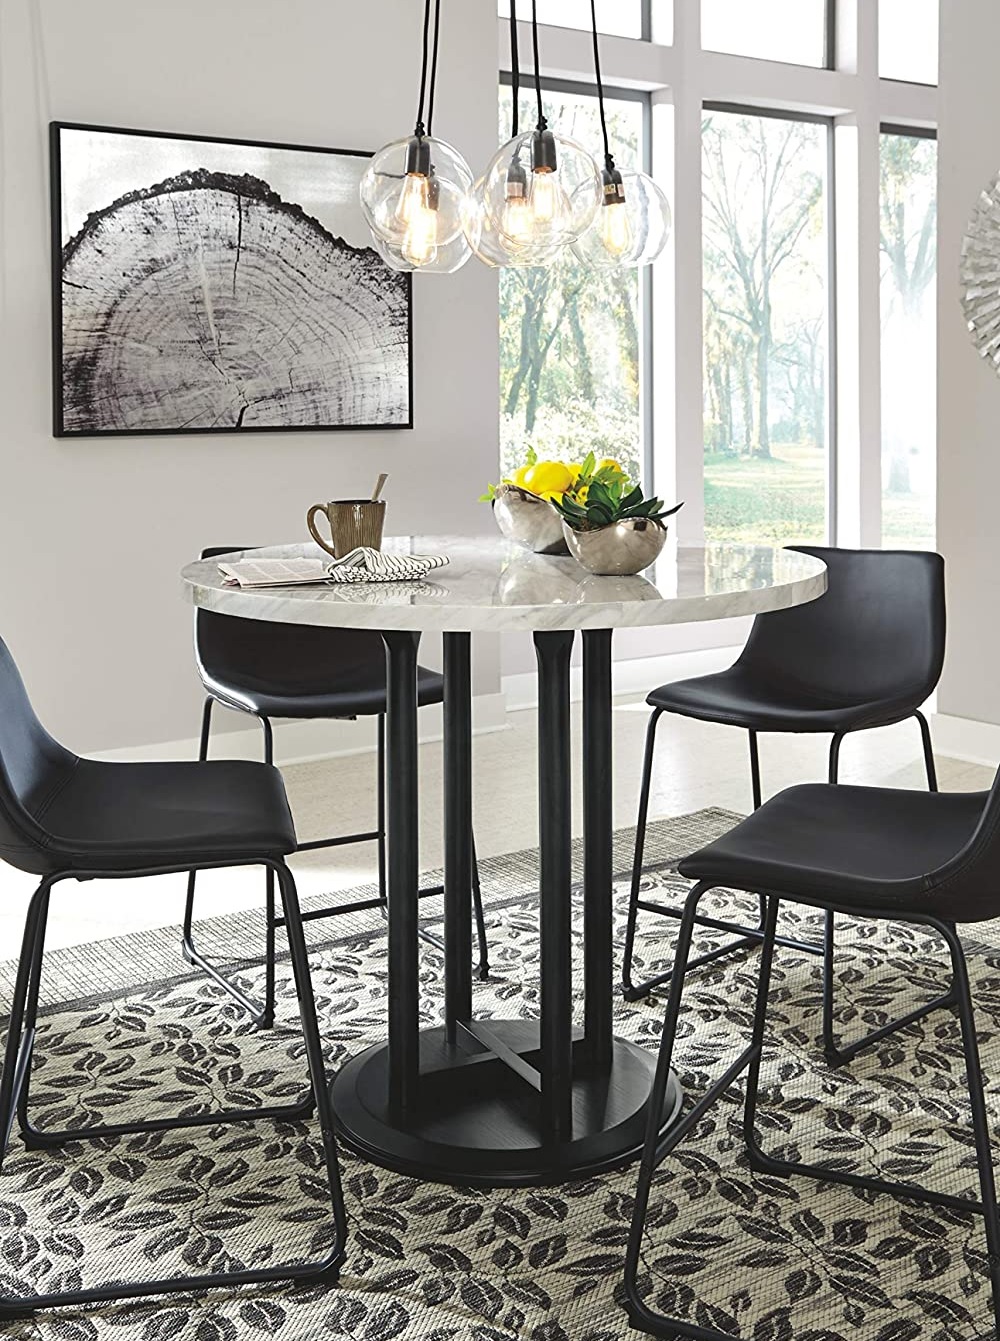 counter height round kitchen table set for 4 unique pedestal base contemporary dining furniture for sale on amazon faux marble tabletop industrial glam decor ideas